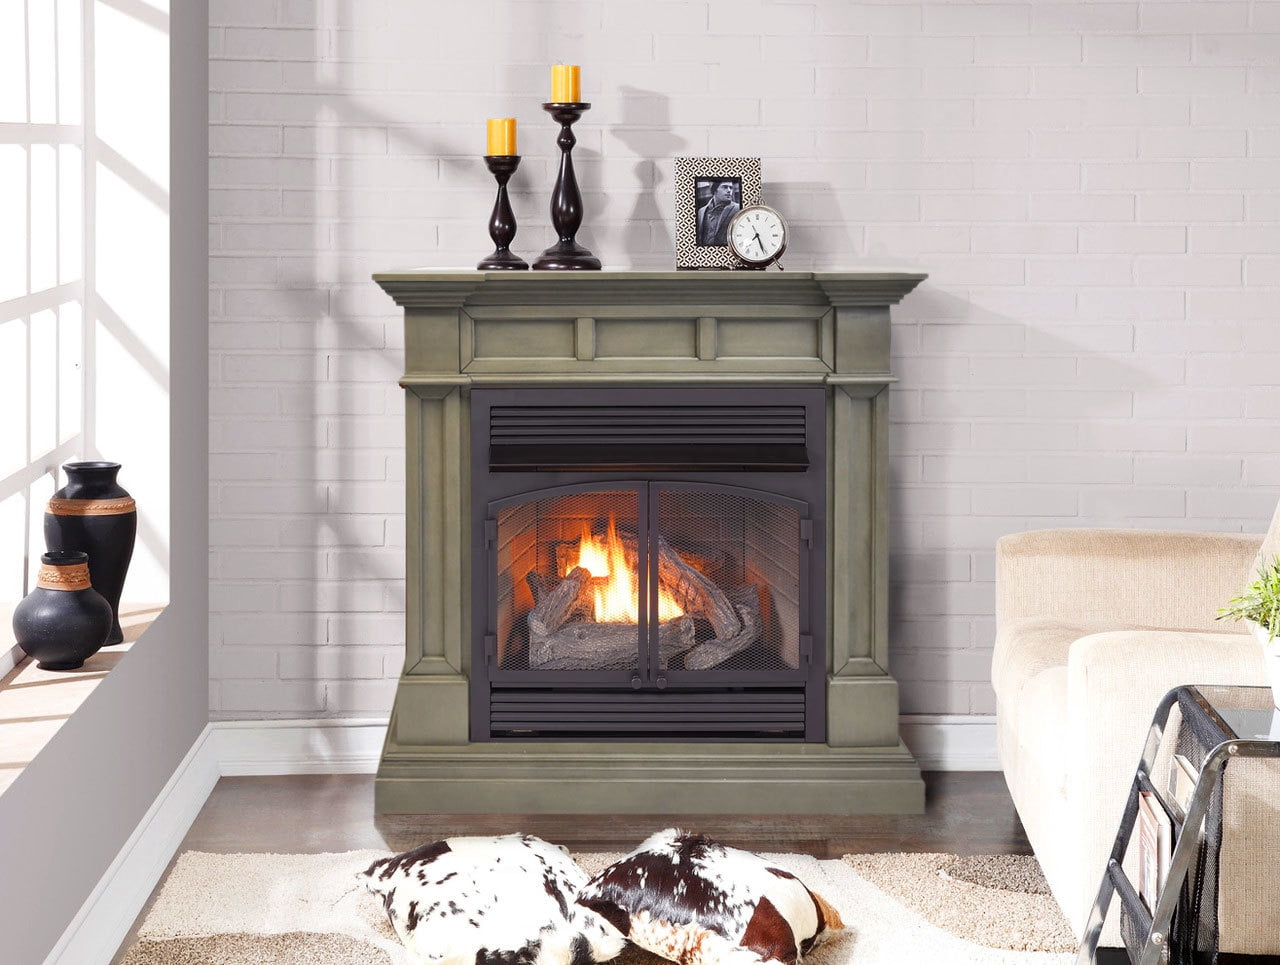 Duluth Forge Dual Fuel Ventless Gas, Ventless Gas Fireplace Insert With Remote